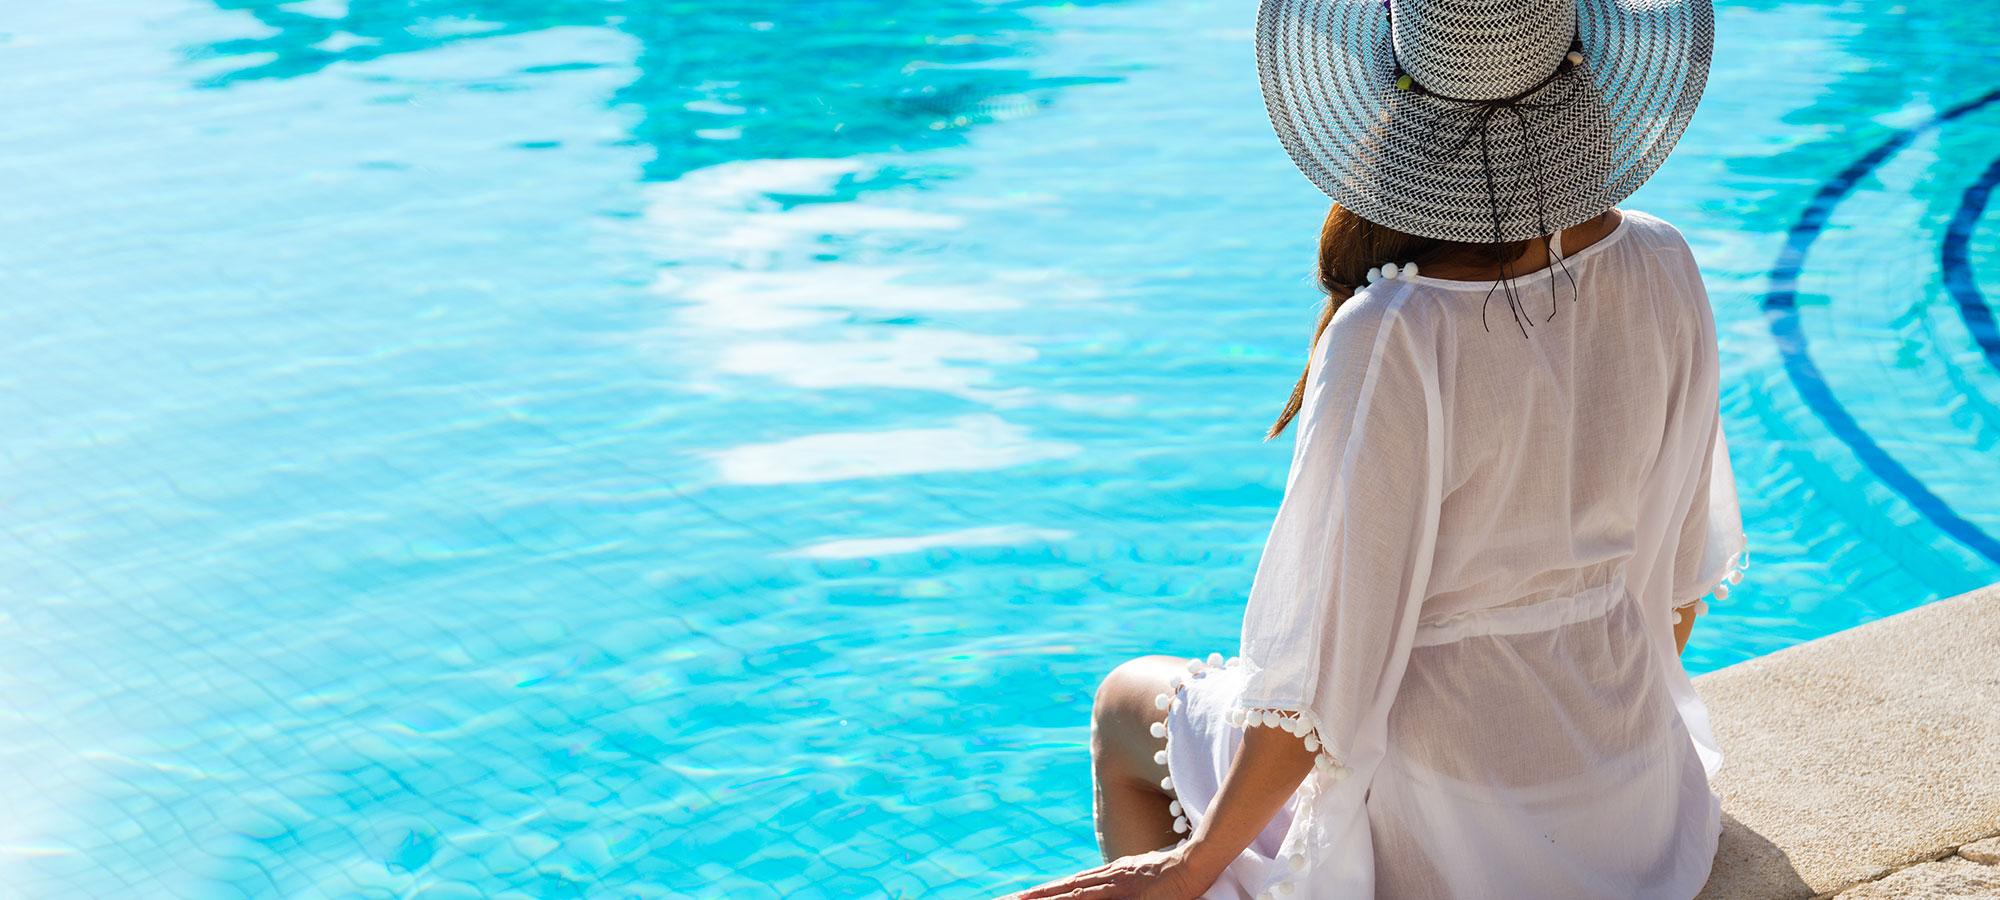 Woman wearing a white gown and straw hat sitting by pool